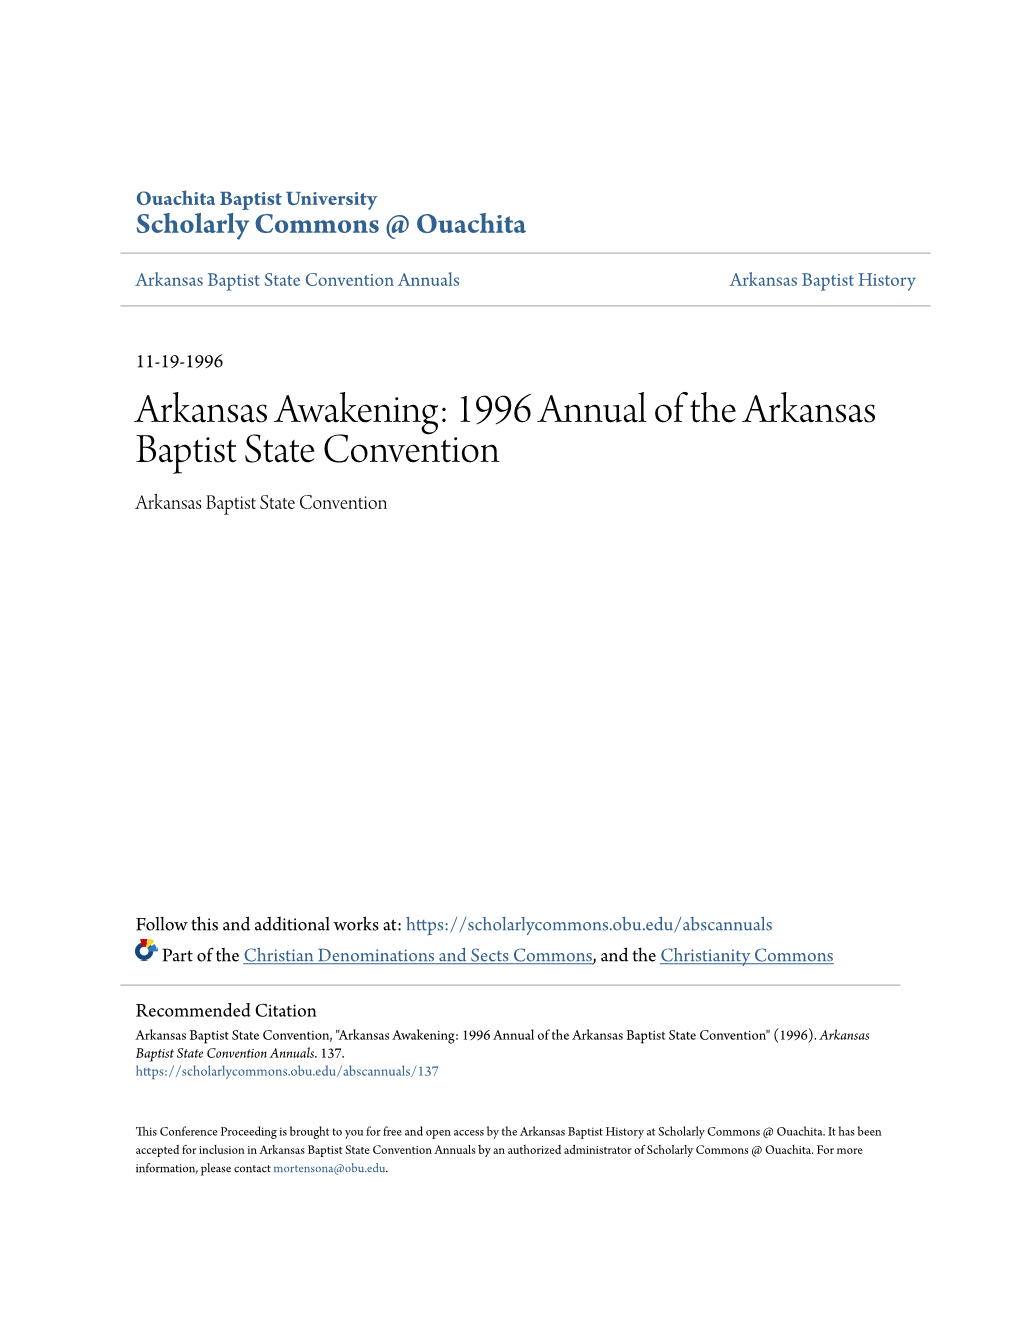 1996 Annual of the Arkansas Baptist State Convention Arkansas Baptist State Convention